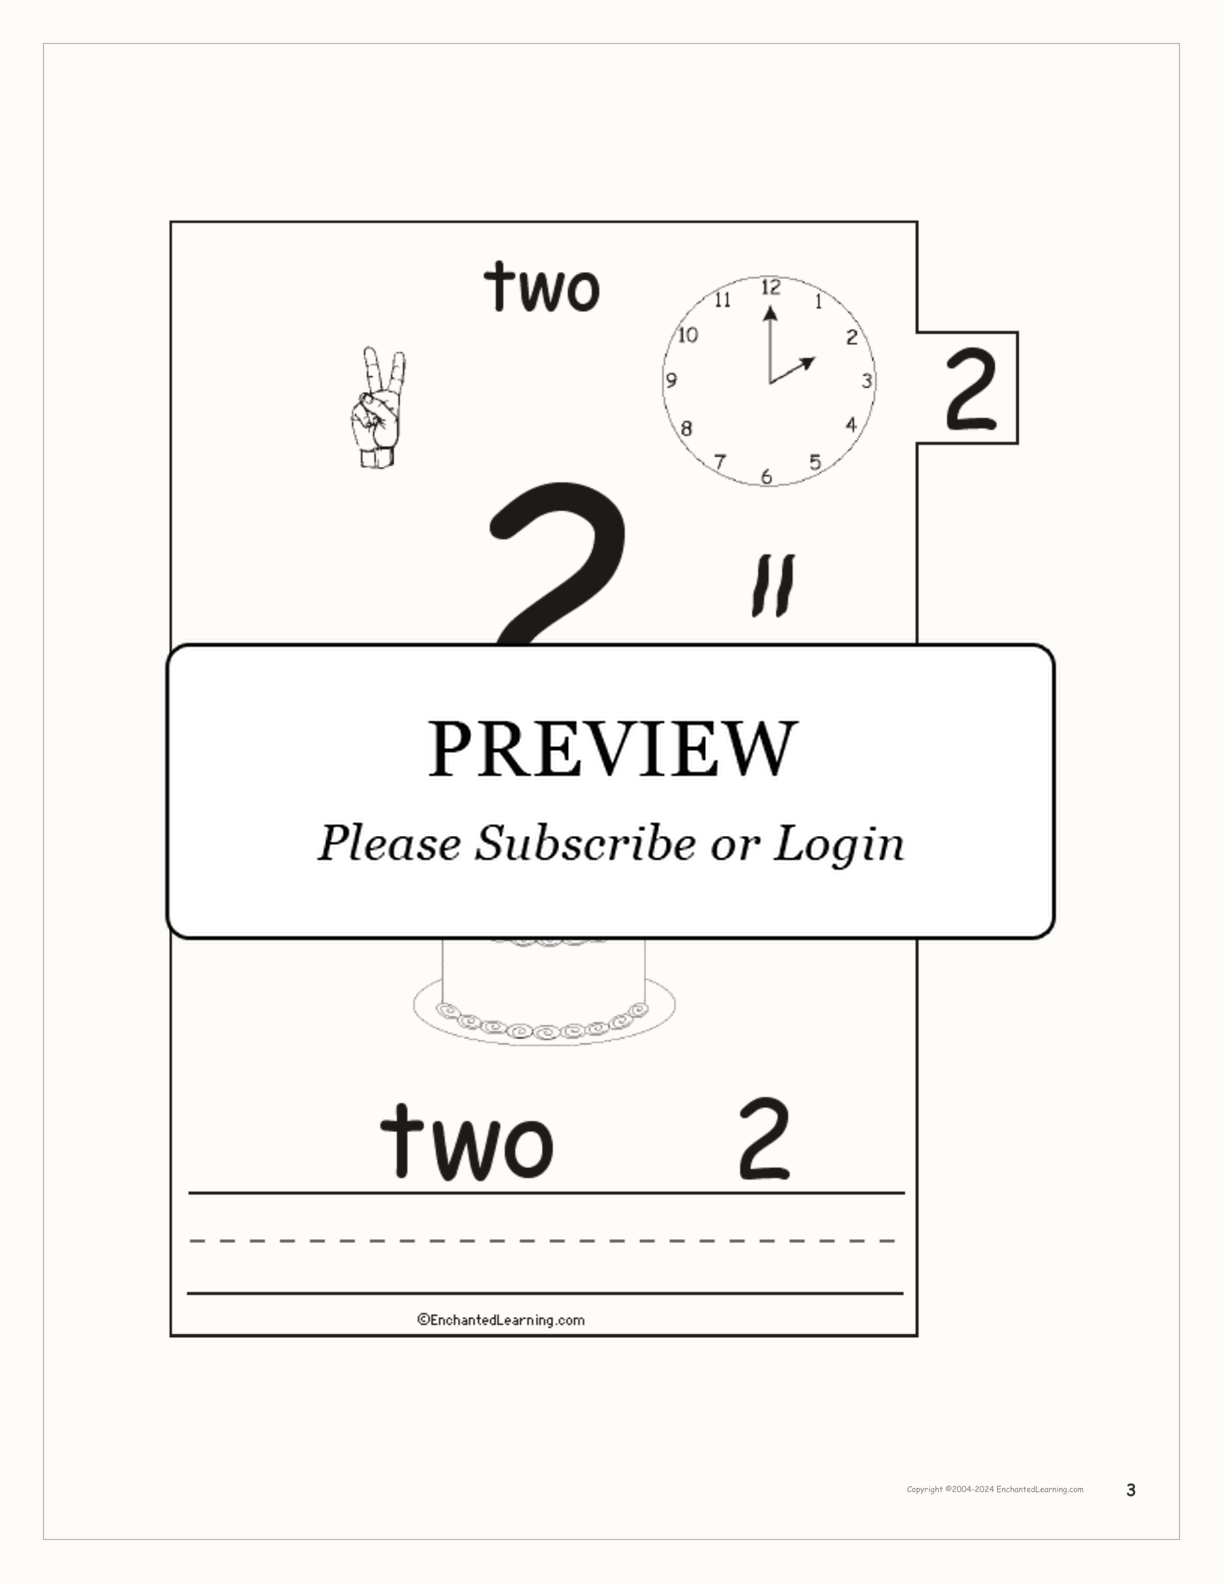 Numbers Book interactive printout page 3